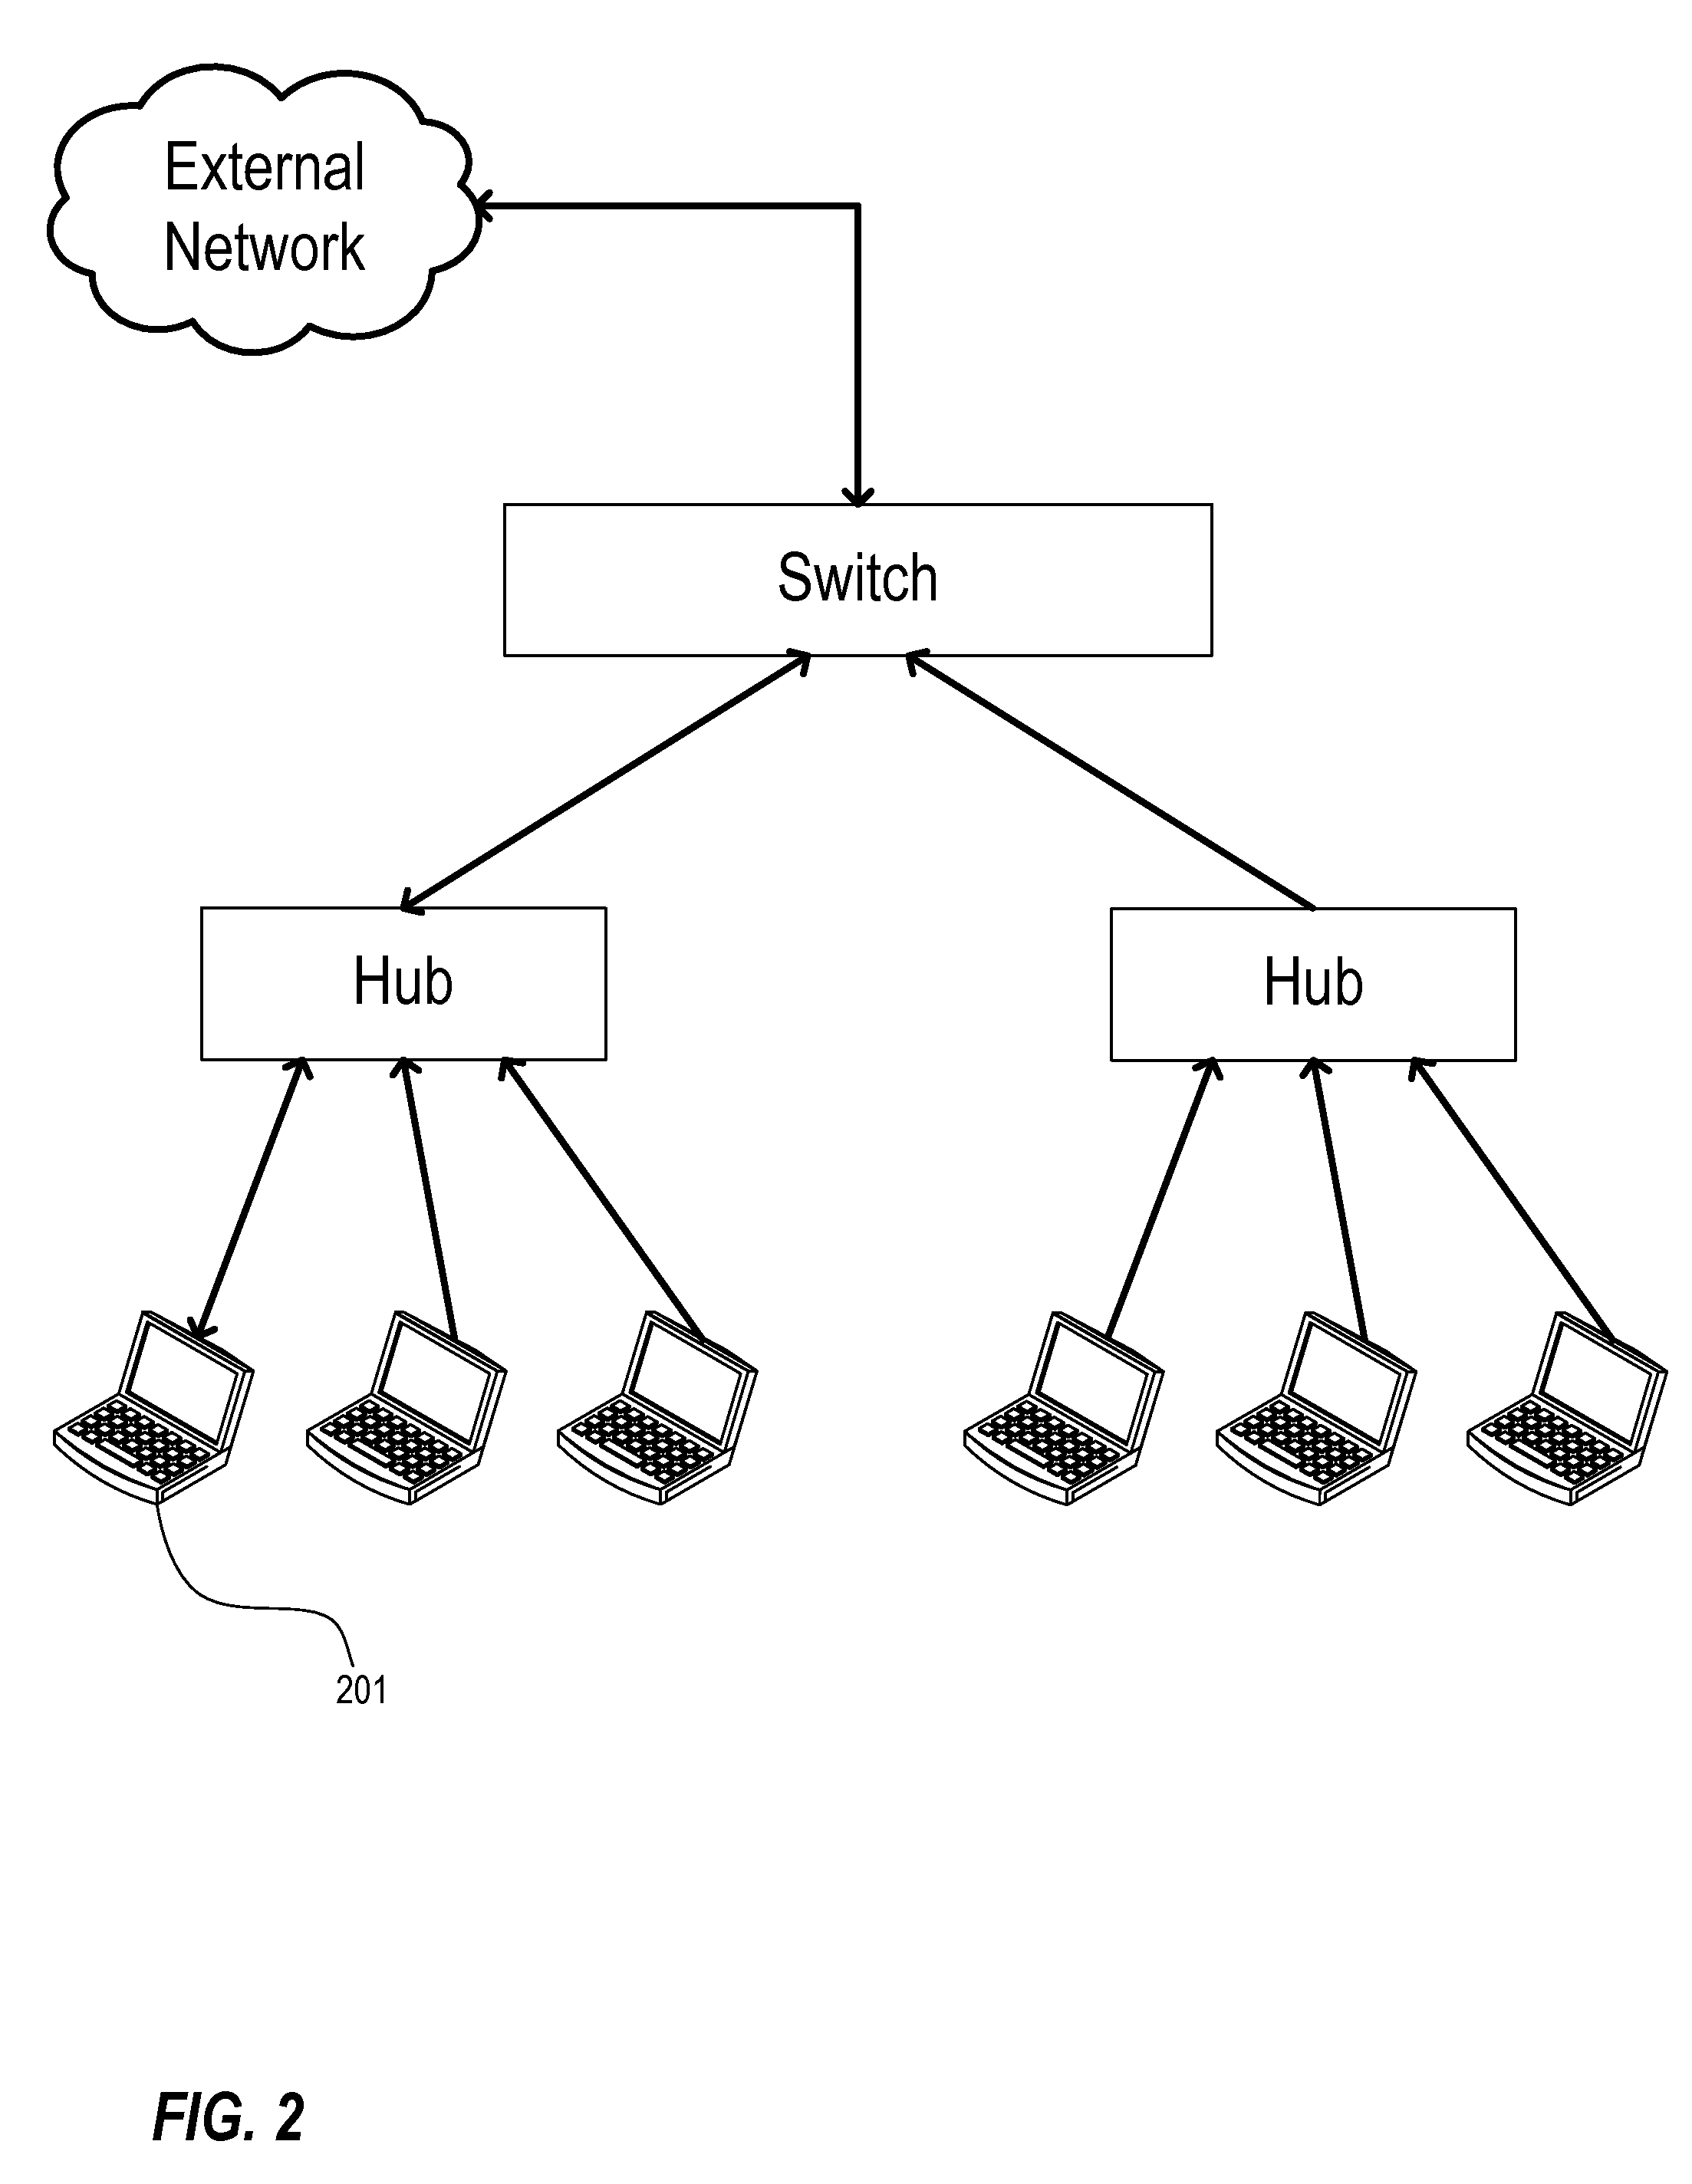 Validating packets in network communications